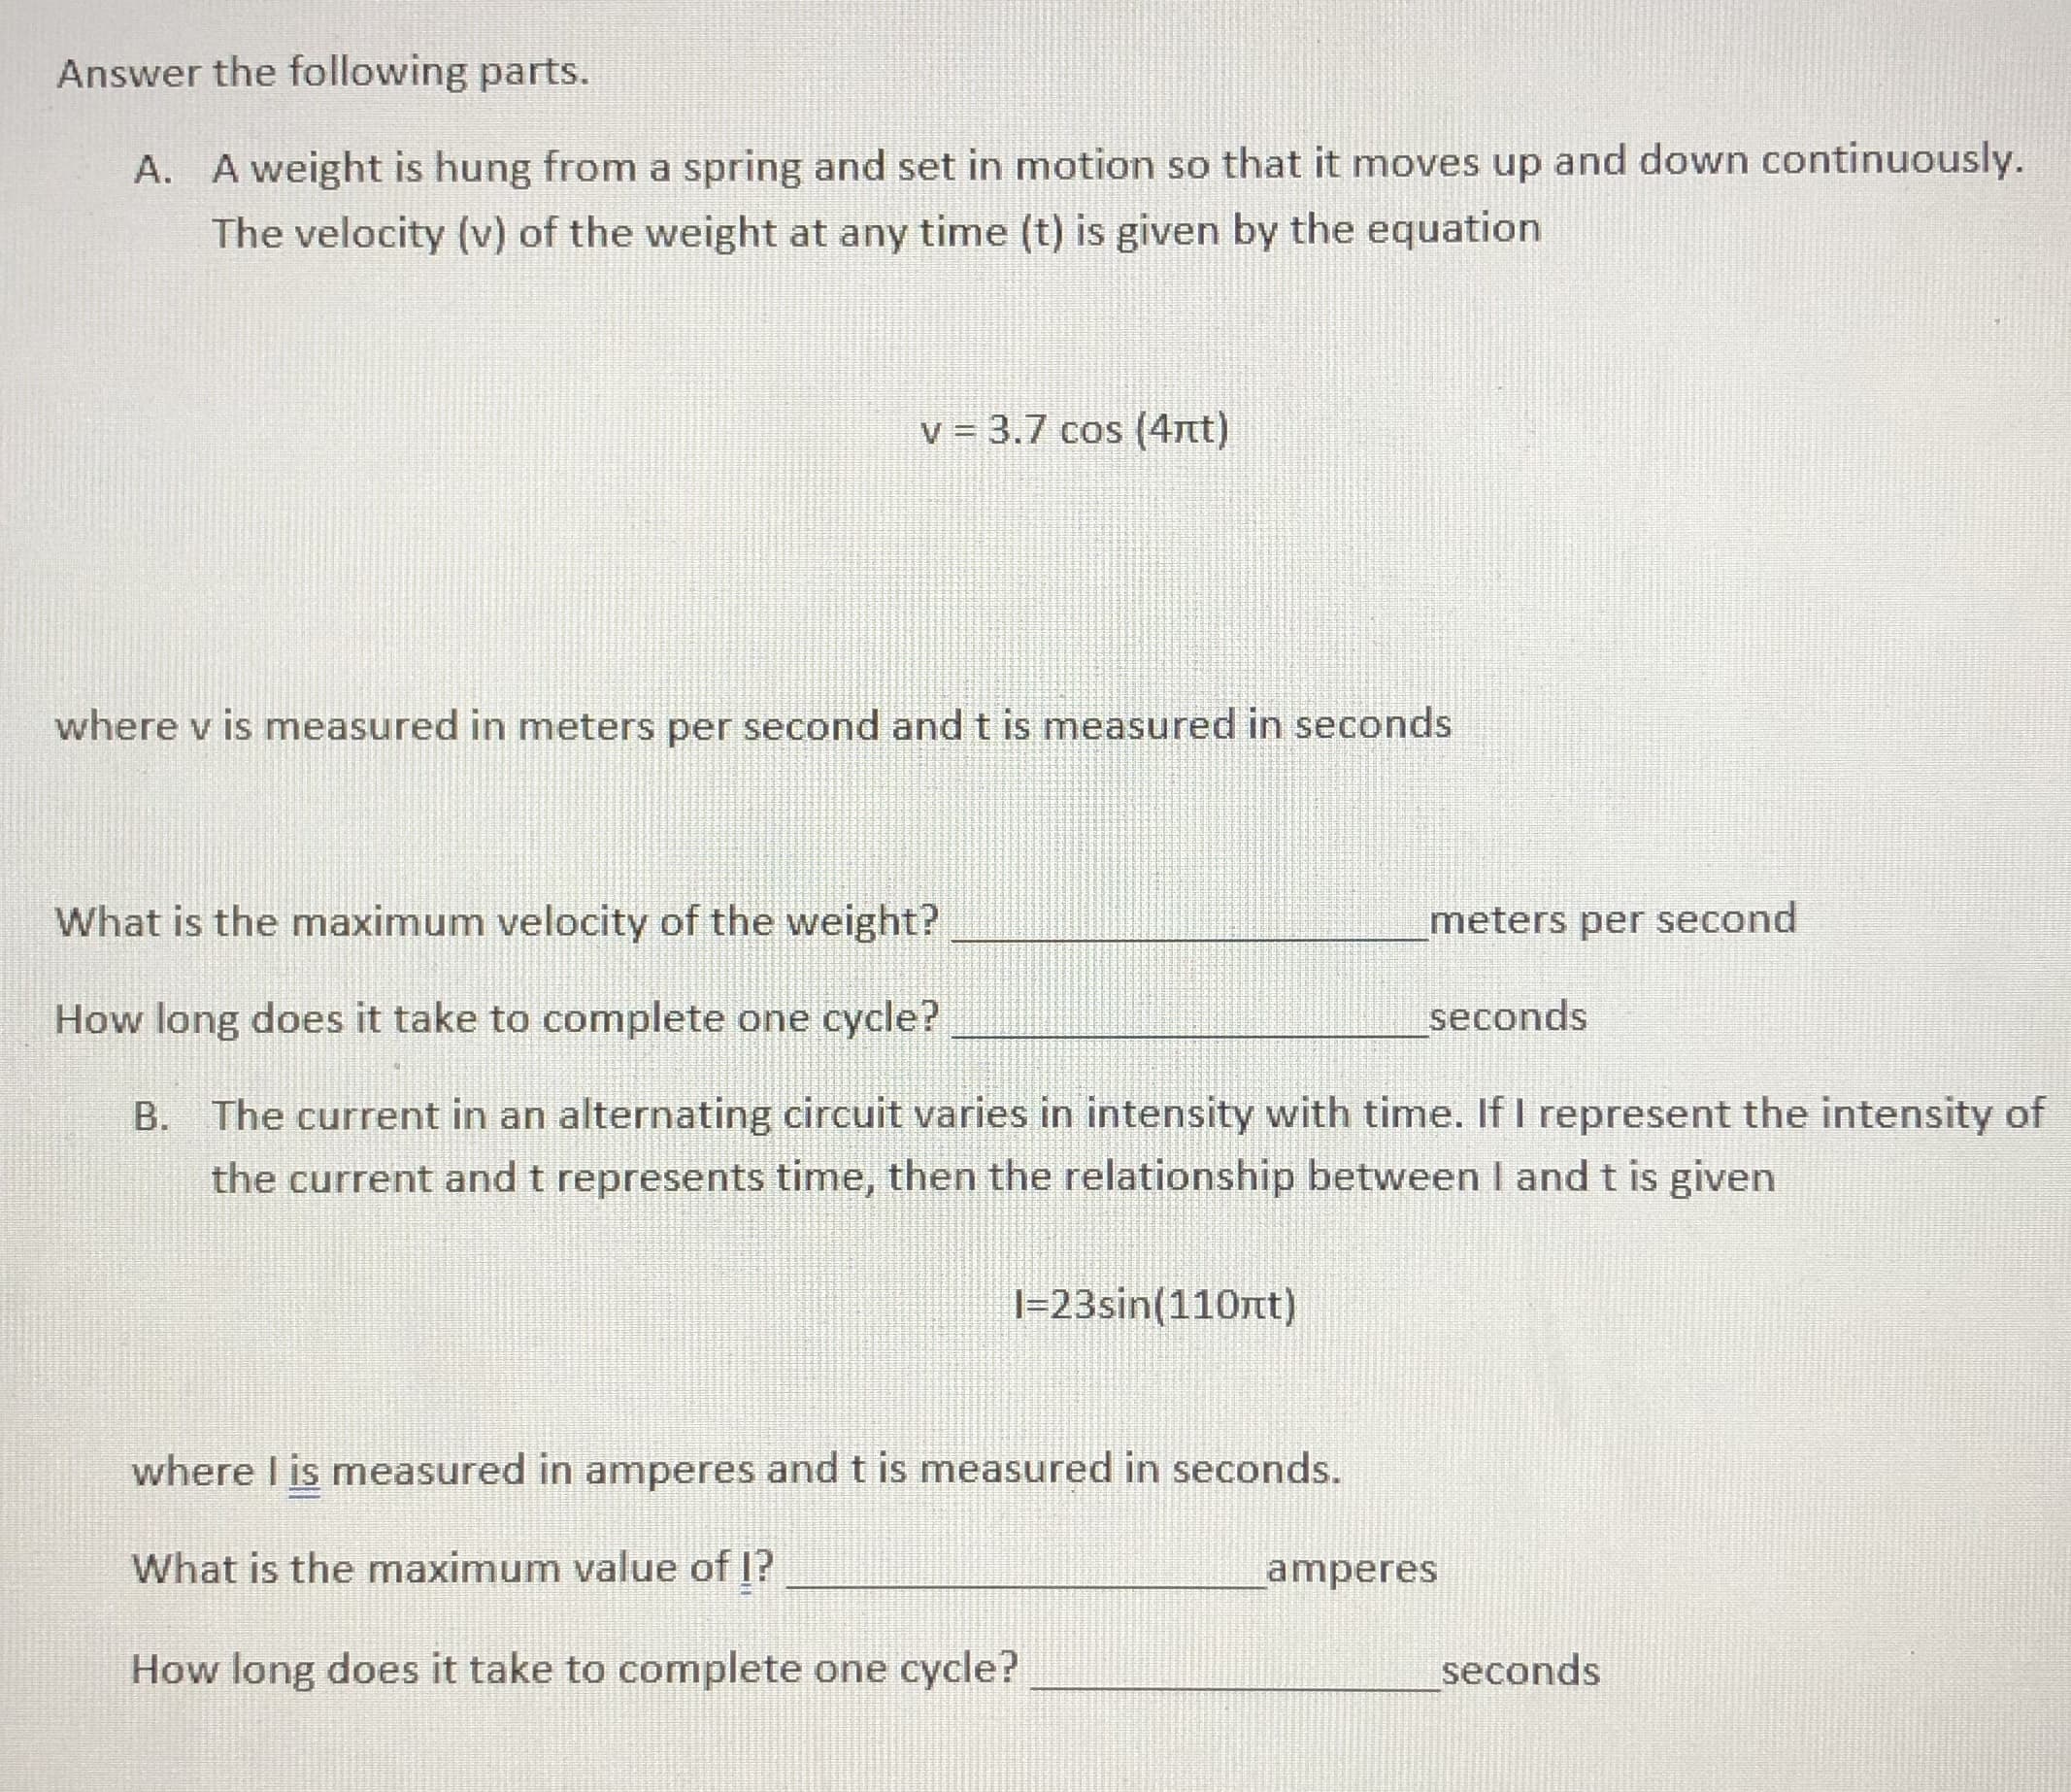 Answer the following parts.
A. A weight is hung from a spring and set in motion so that it moves up and down continuously.
The velocity (v) of the weight at any time (t) is given by the equation
v = 3.7 cos (4nt)
where v is measured in meters per second and t is measured in seconds
What is the maximum velocity of the weight?
meters per second
How long does it take to complete one cycle?
seconds
